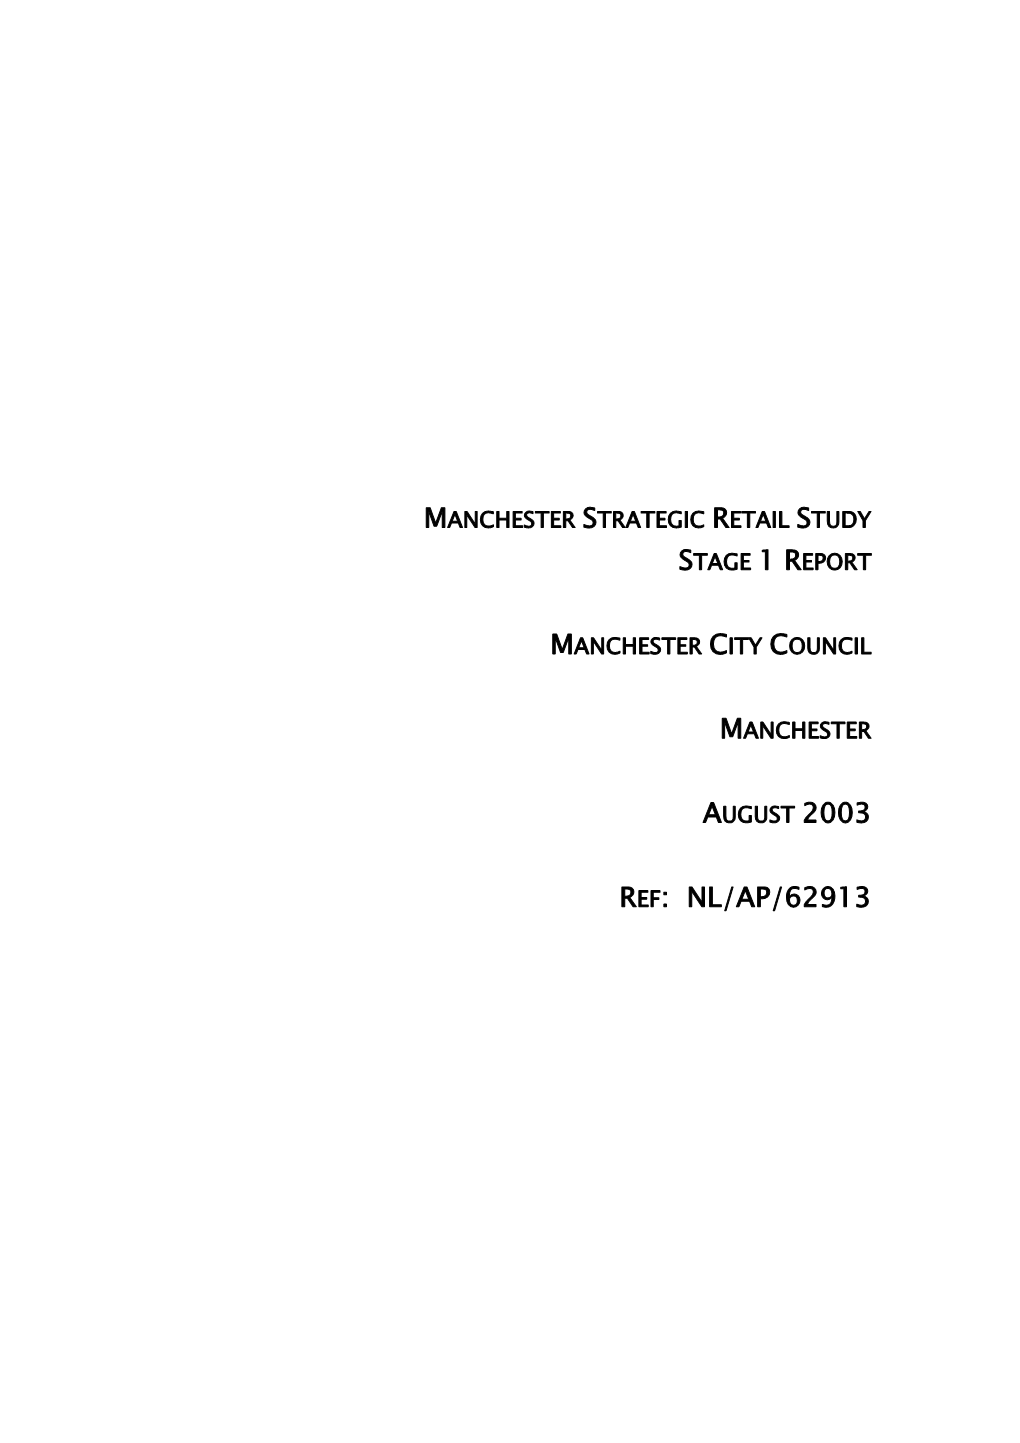 Manchester Strategic Retail Study Stage 1 Report Manchester City Council